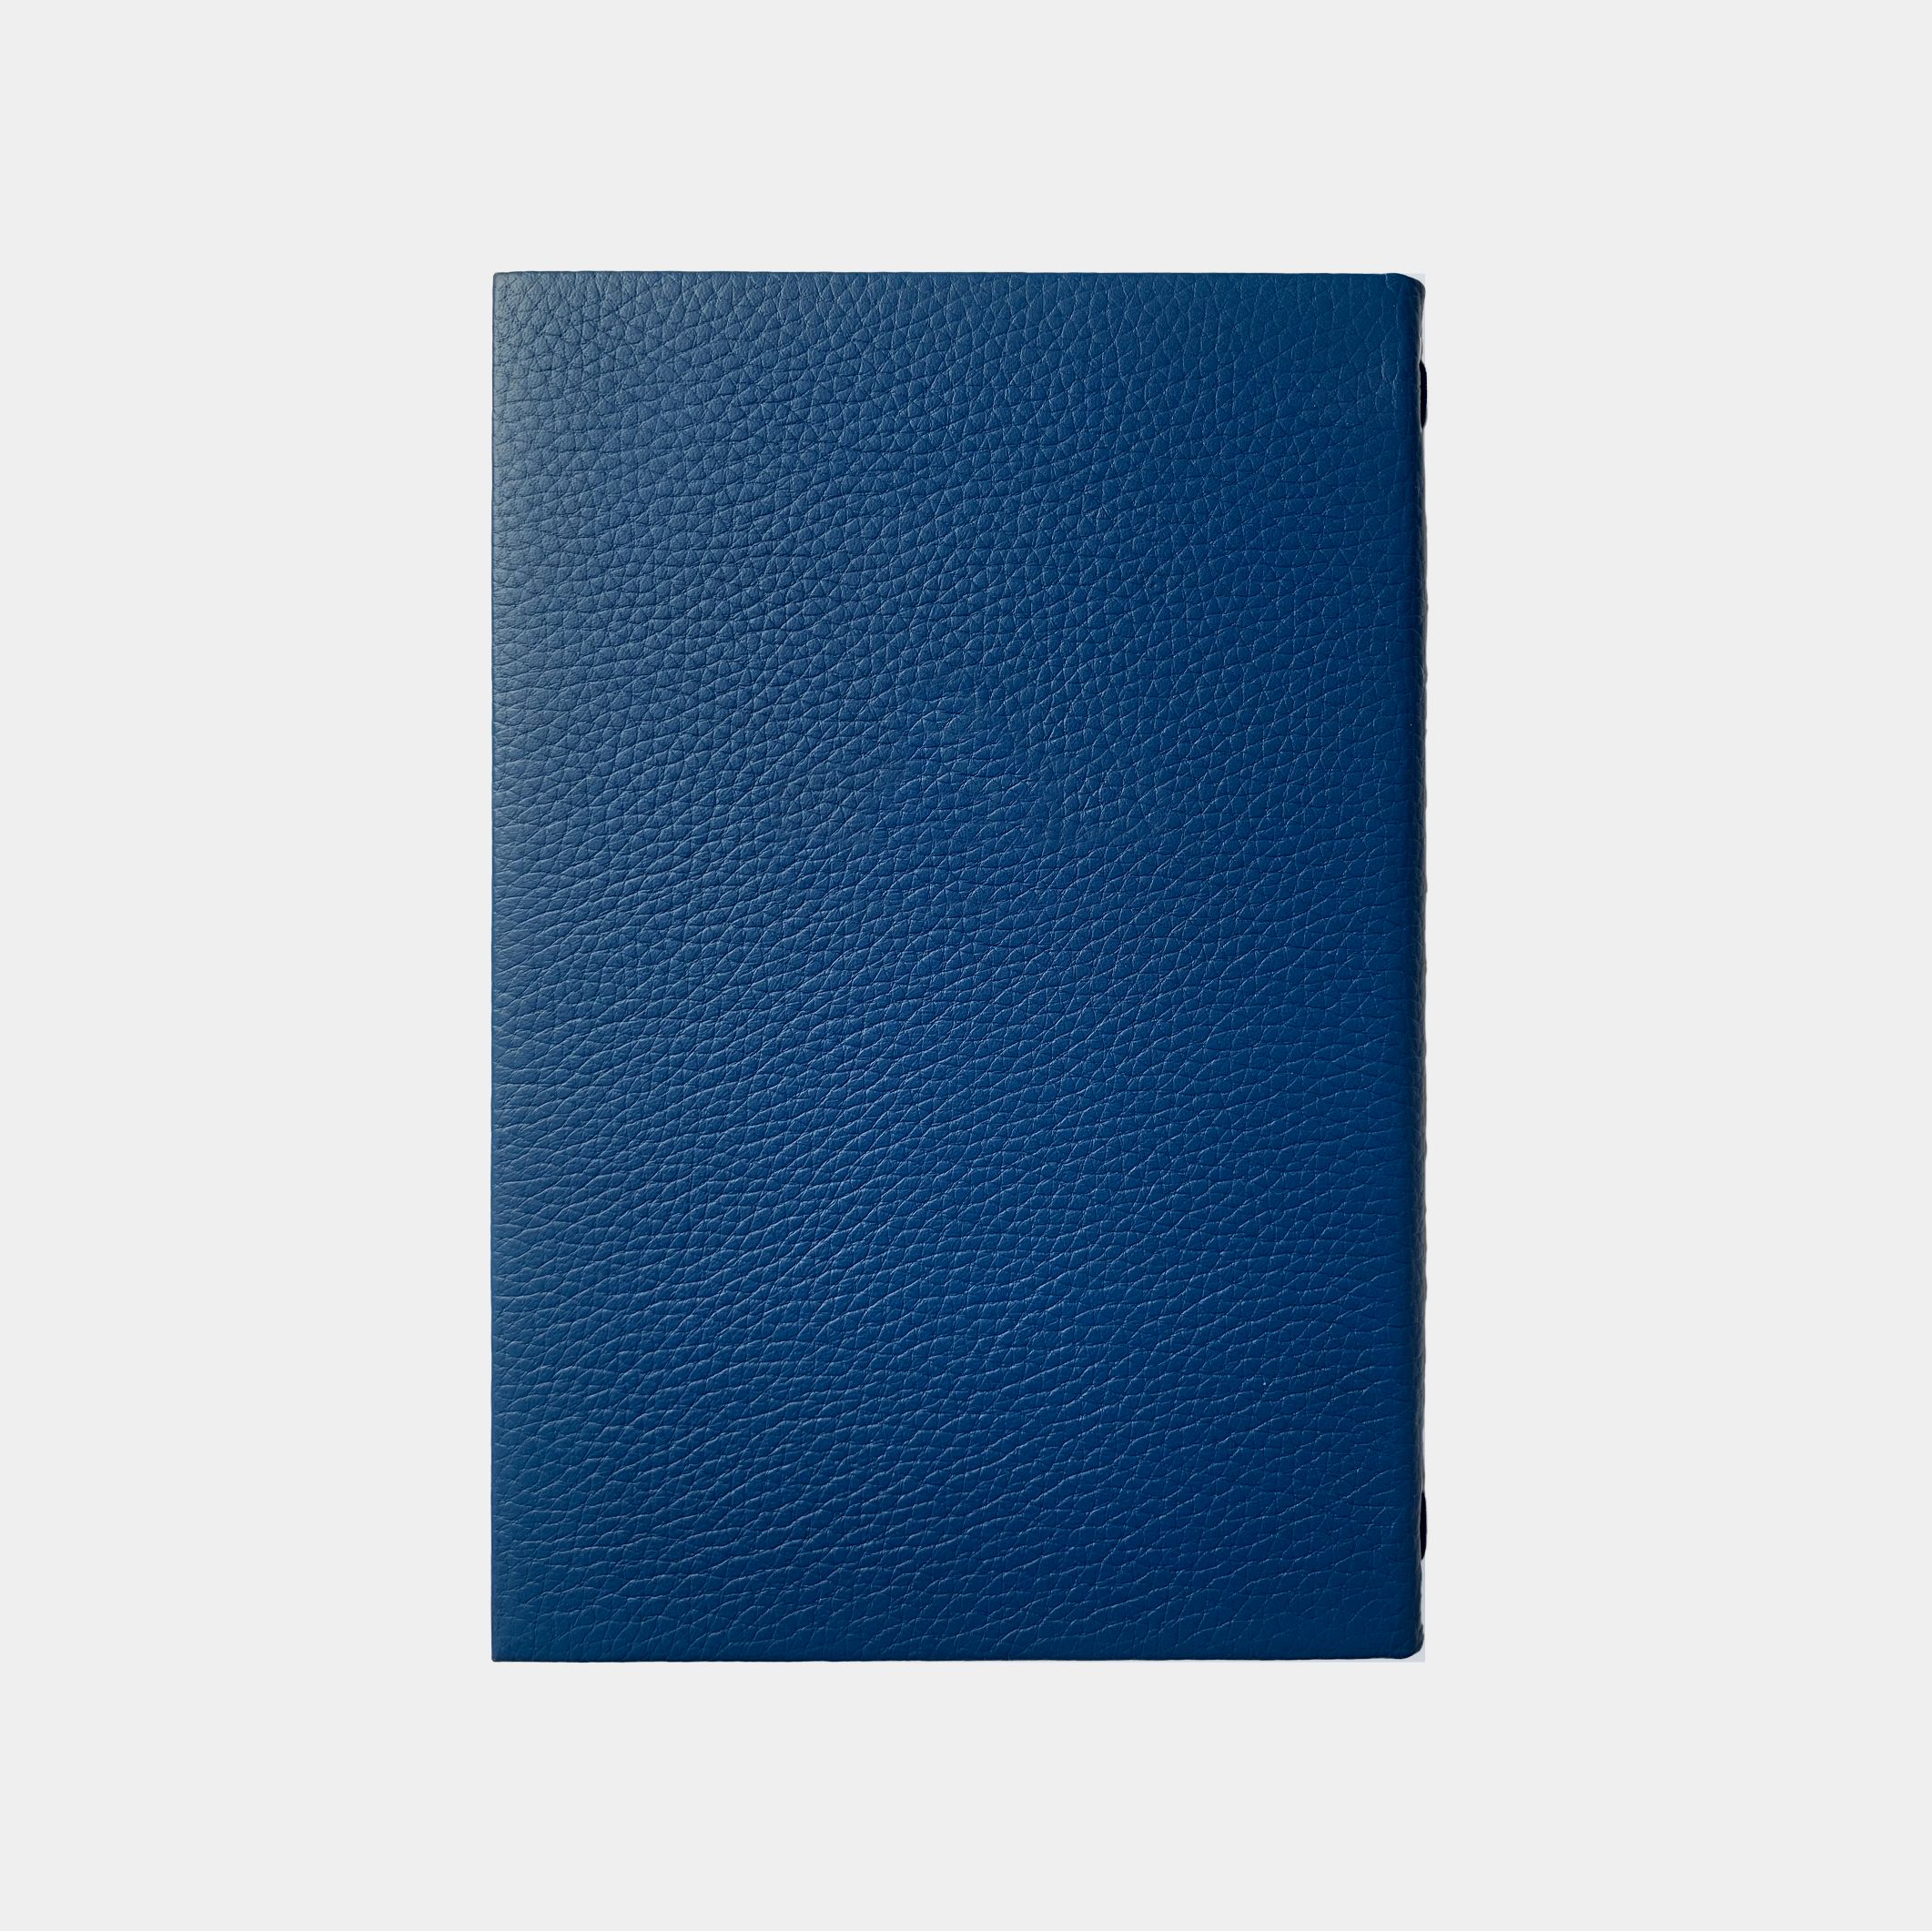 A5 pebble grain leather menu cover to hold your bar or restaurant menu